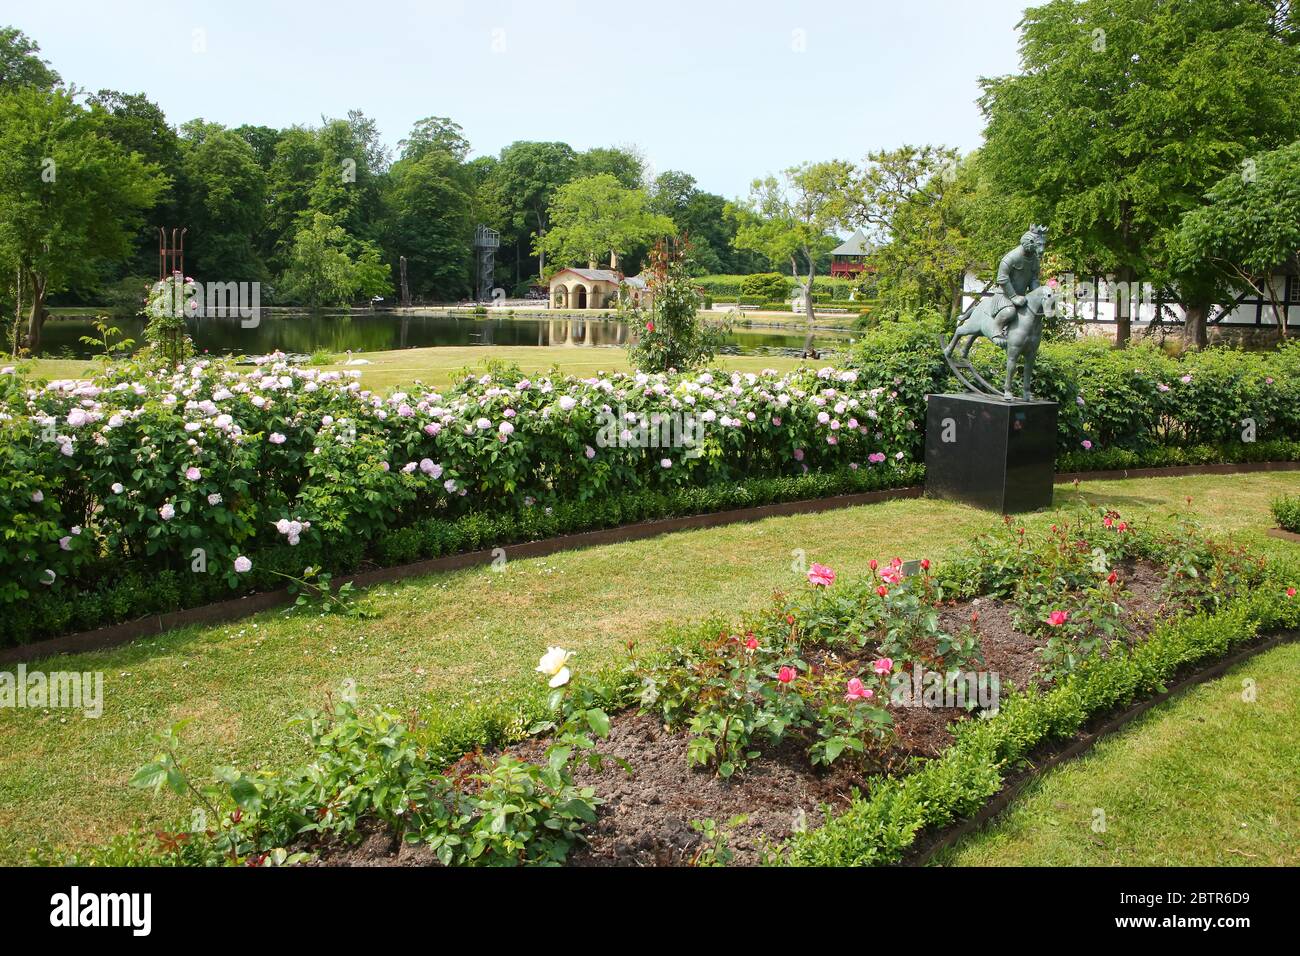 Traditional formal public garden, in bloom in the summer with a lake in the background, located near Kvaerndrup, island of Funen, Denmark. Stock Photo